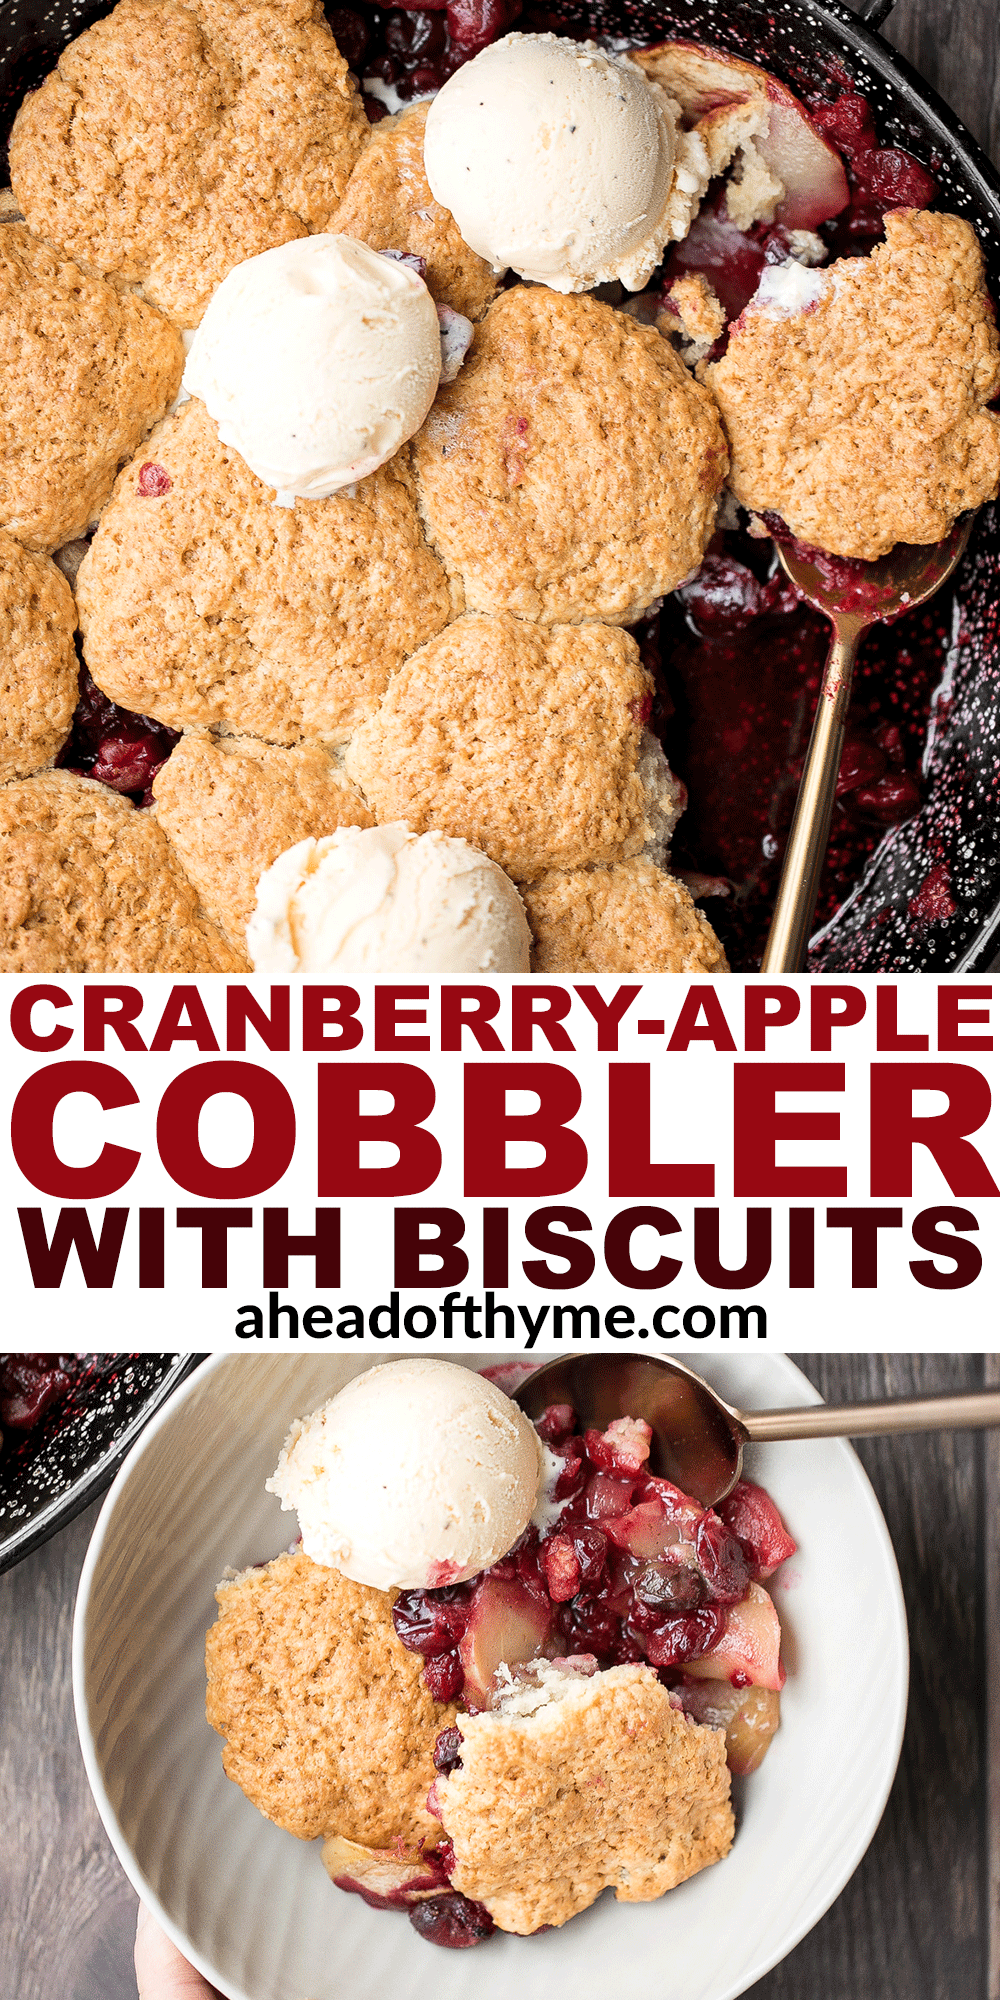 Cranberry-Apple Cobbler with Biscuits